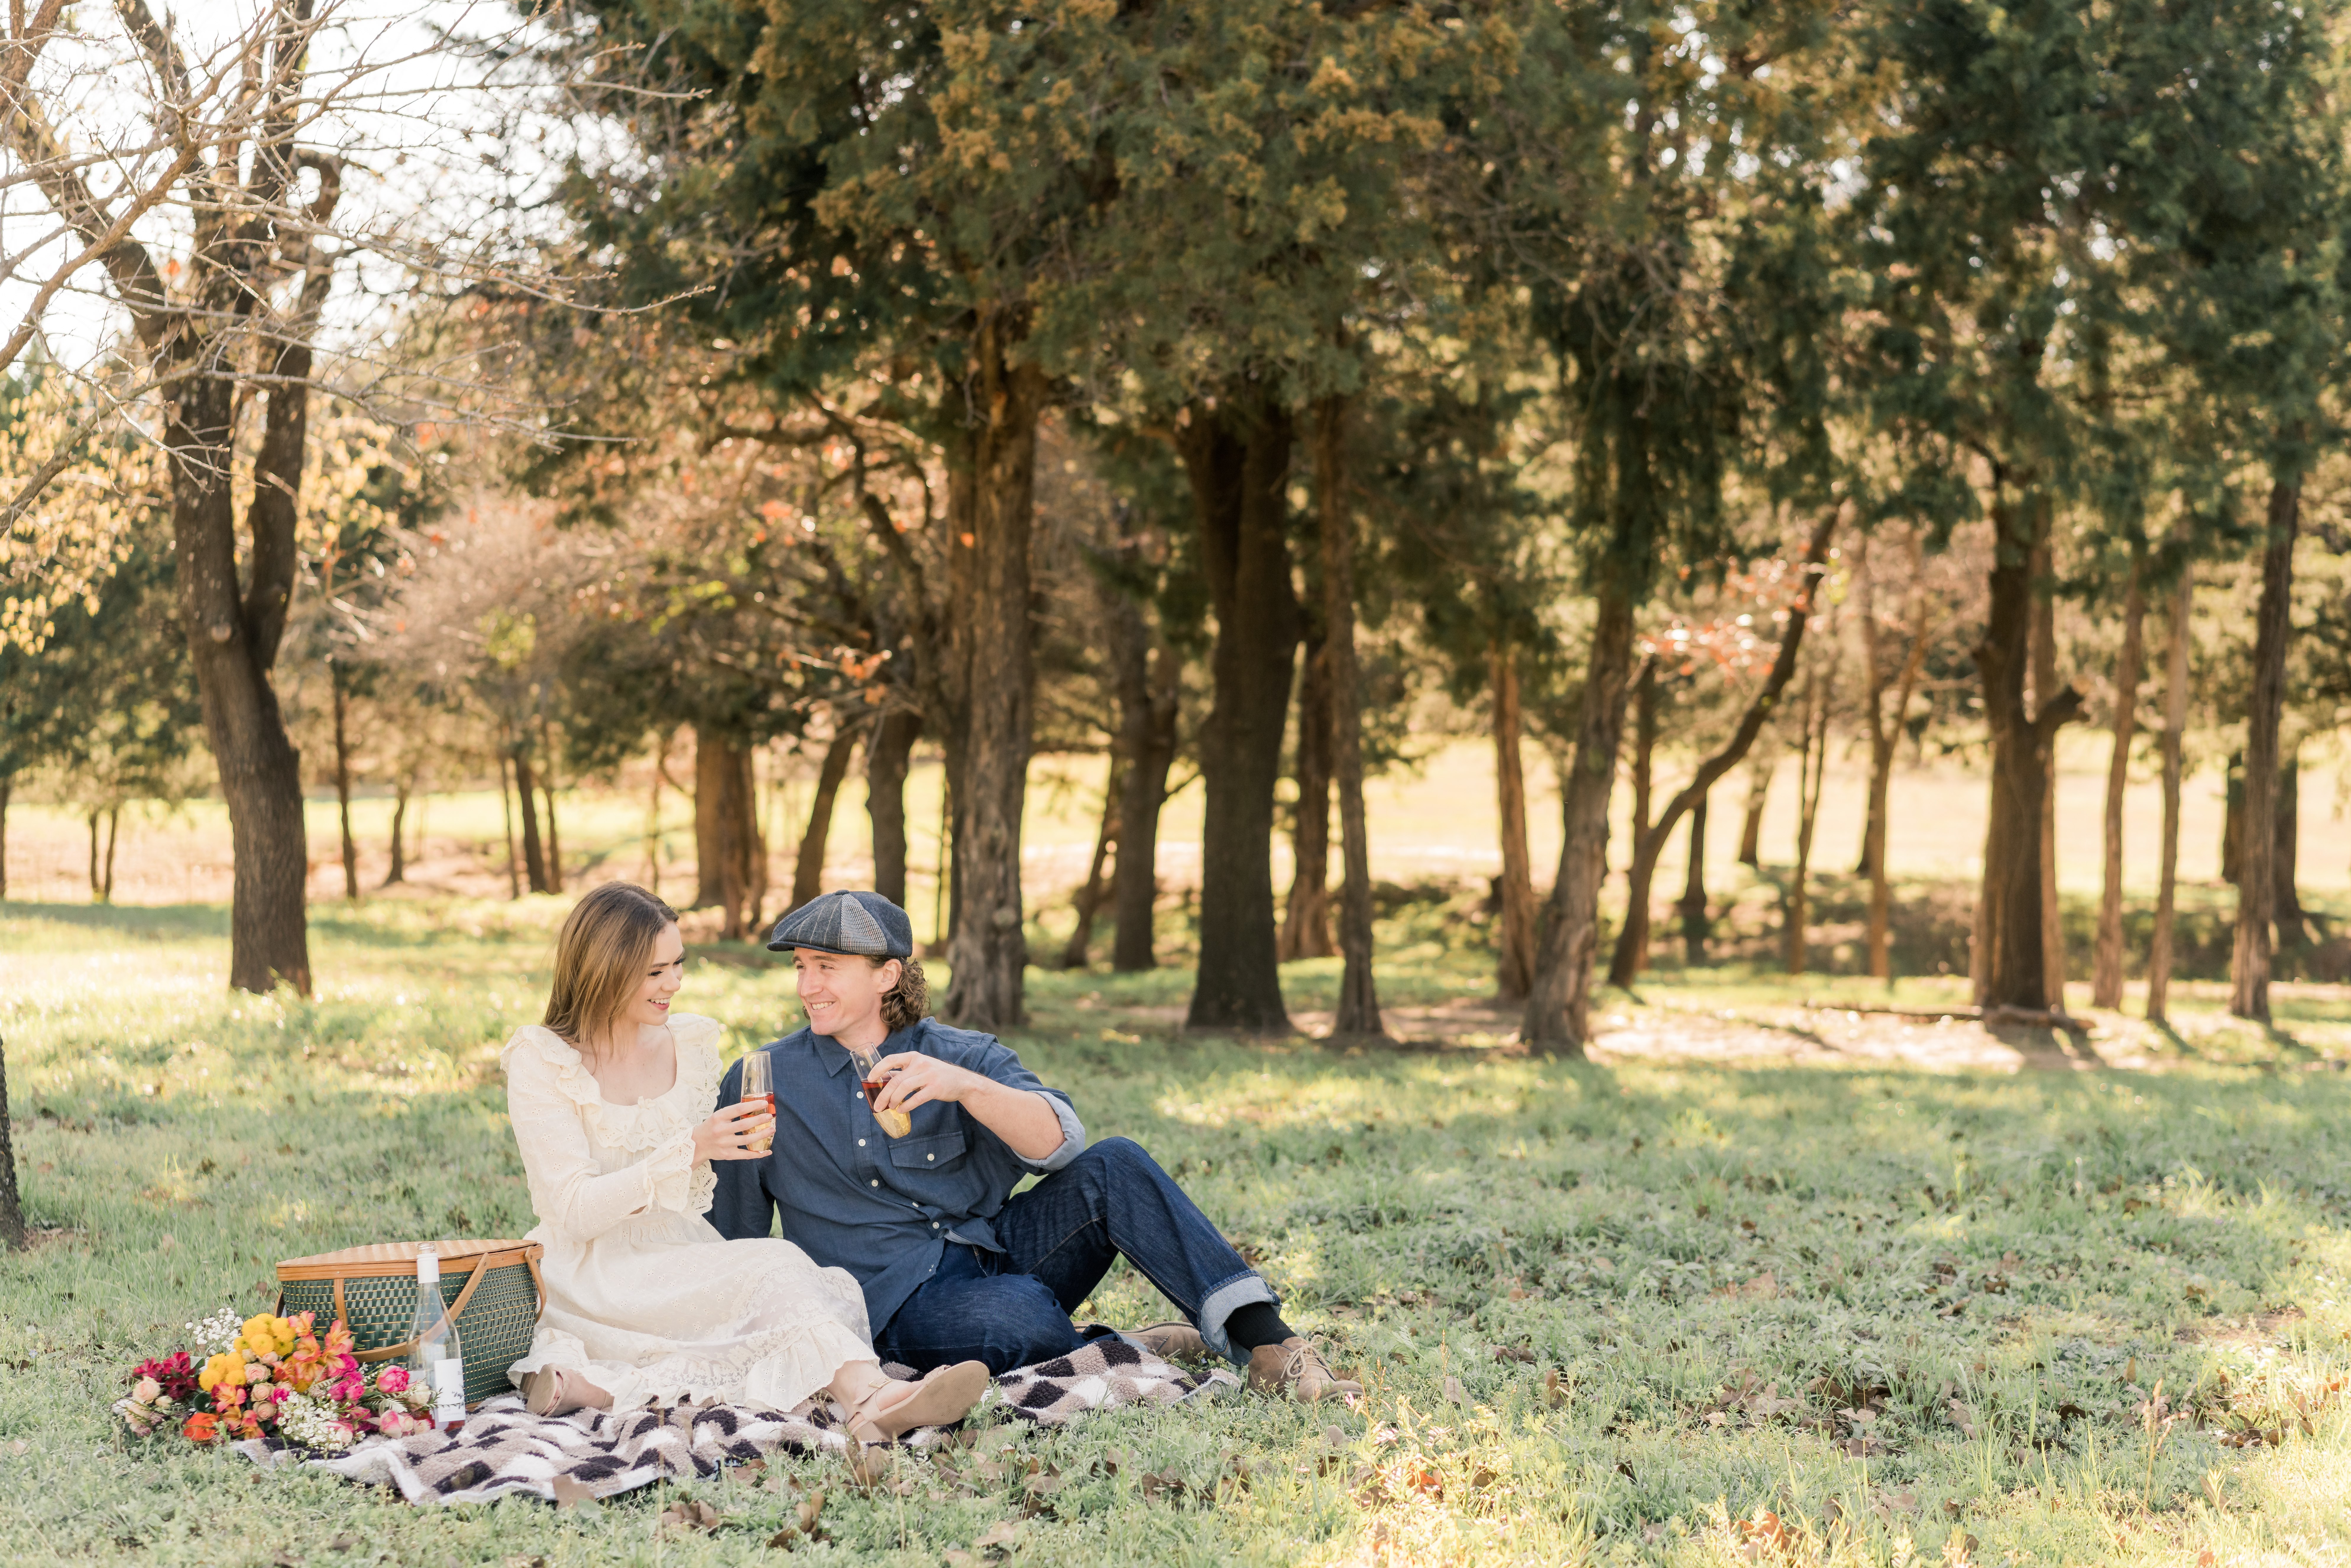 The Notebook Inspired Engagement Session in Dallas Texas